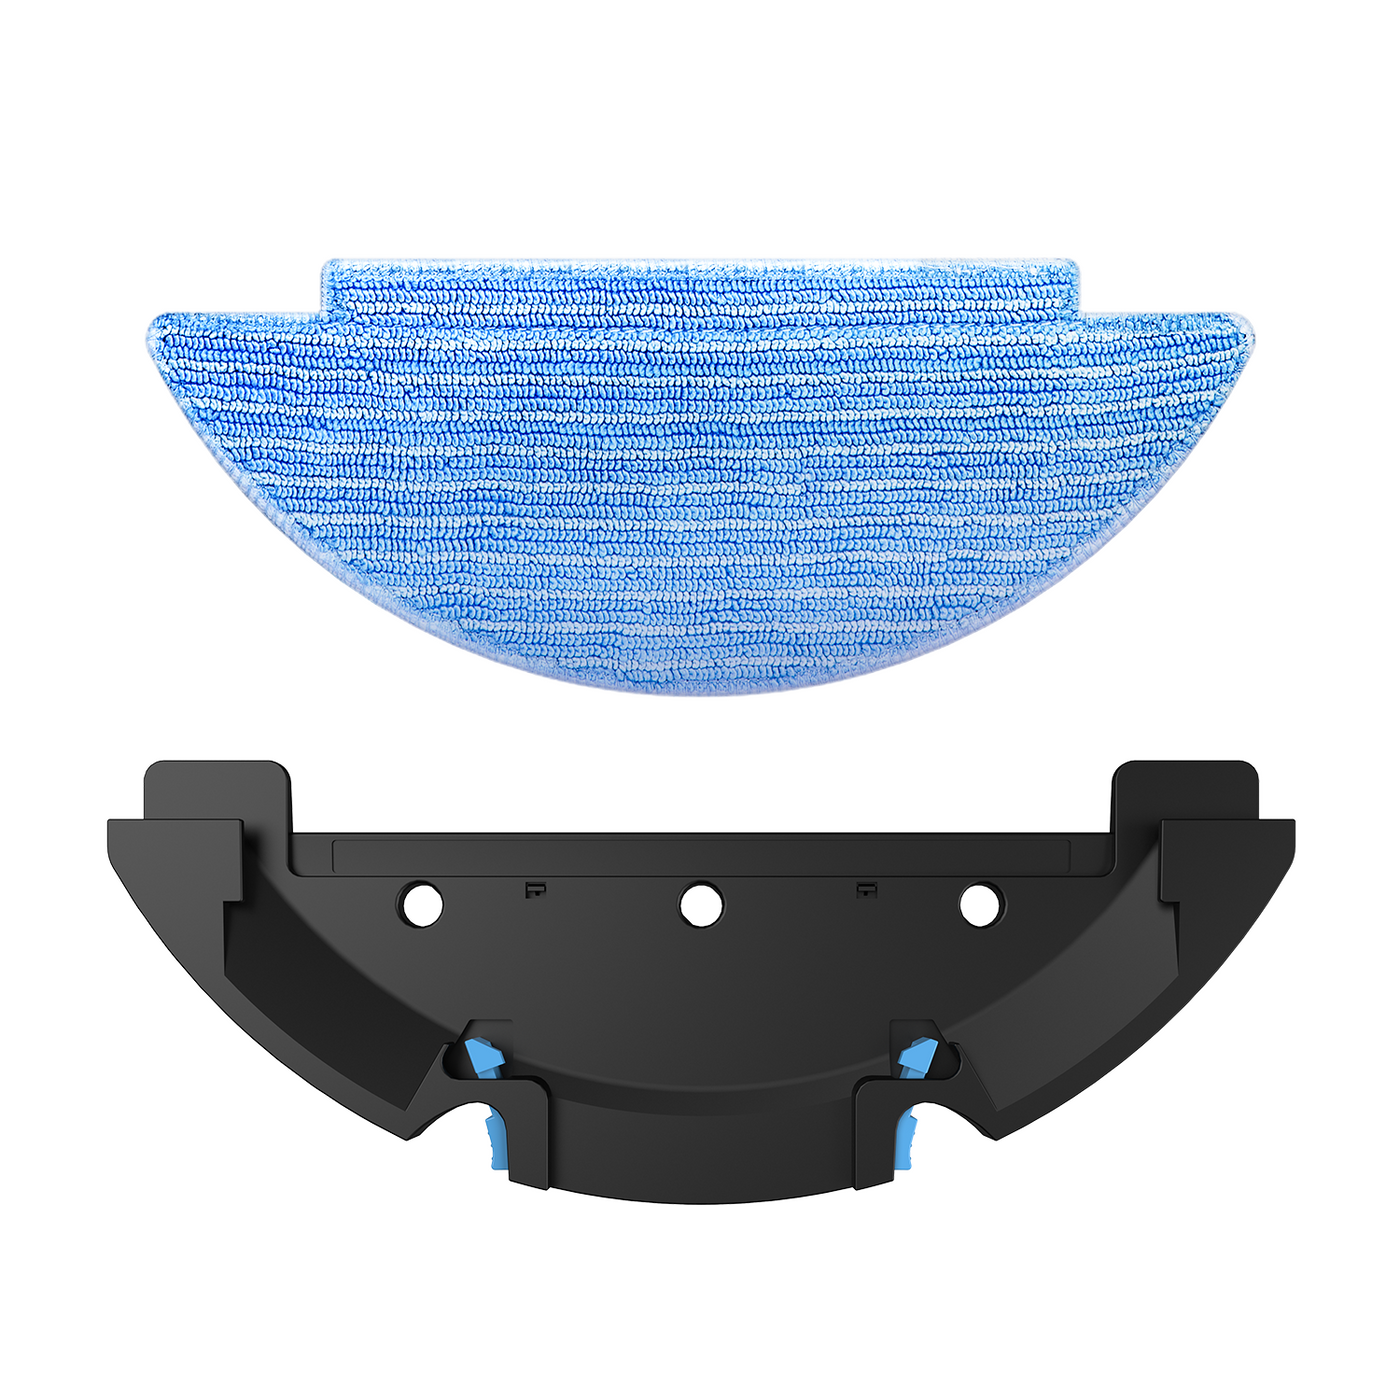 ZACO mop plate for A10 Pro